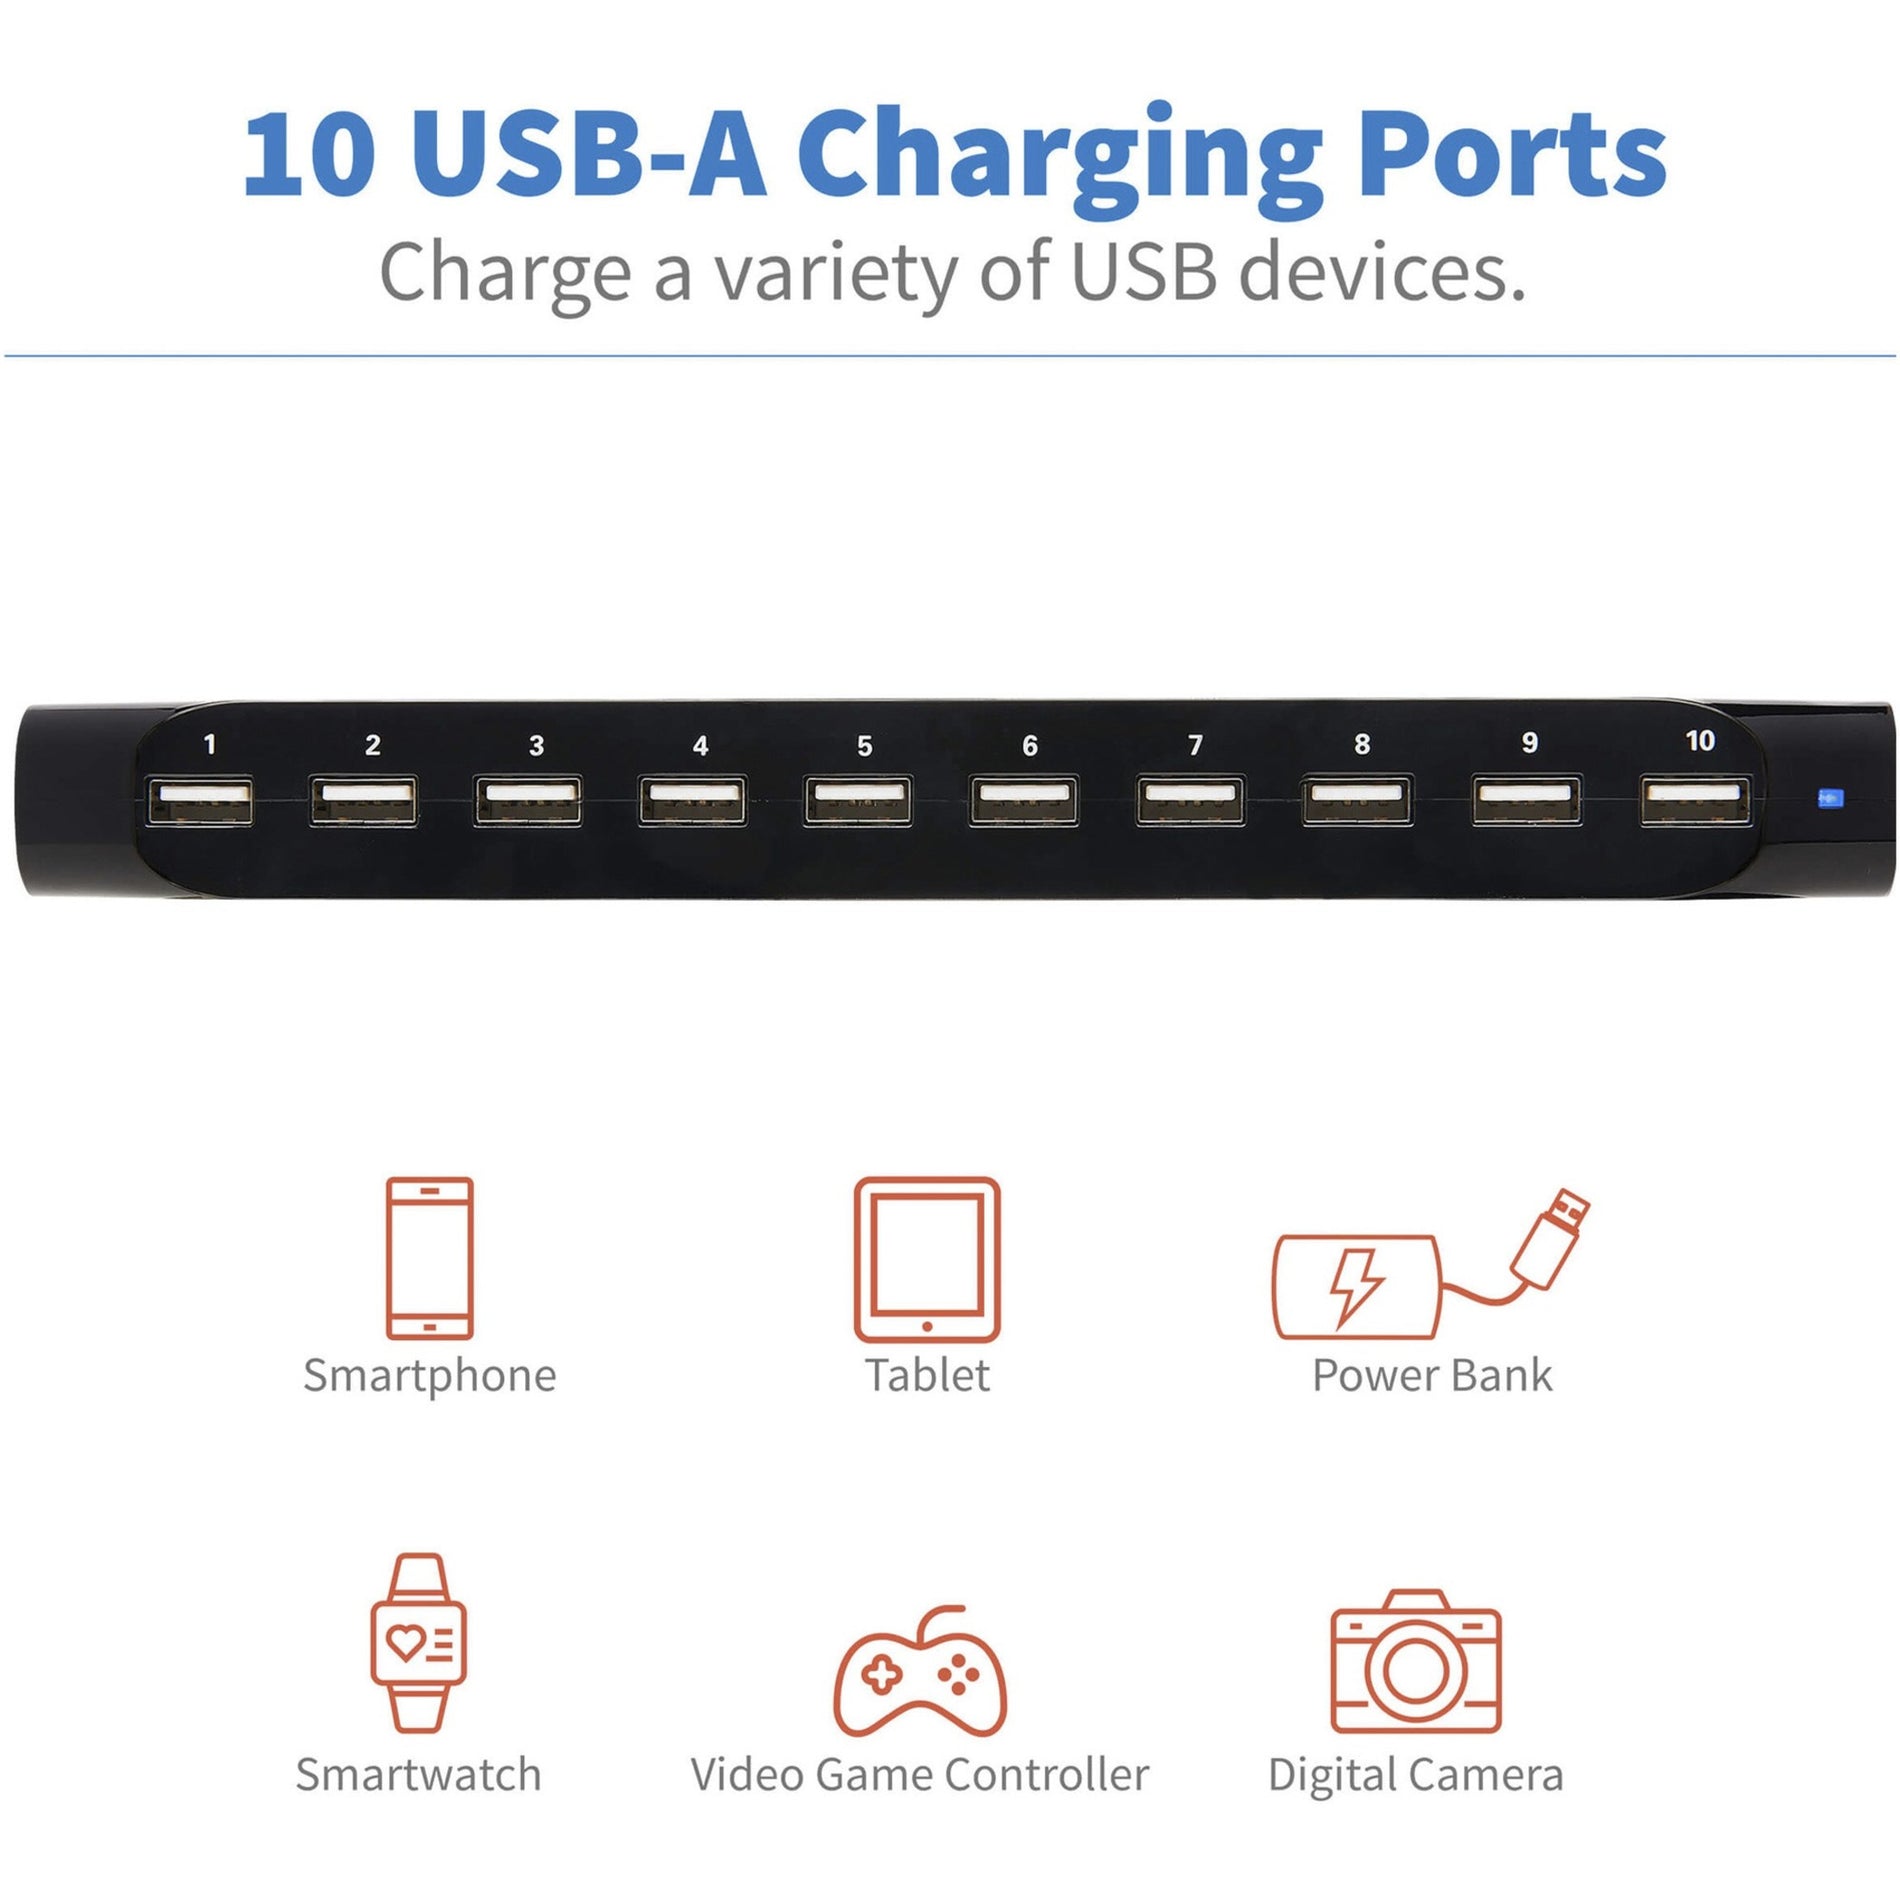 Tripp Lite U280-010-ST 10-Port USB Charger with Built-In Storage, Fast Charging for iPad, Smartphone, Tablet, Notebook